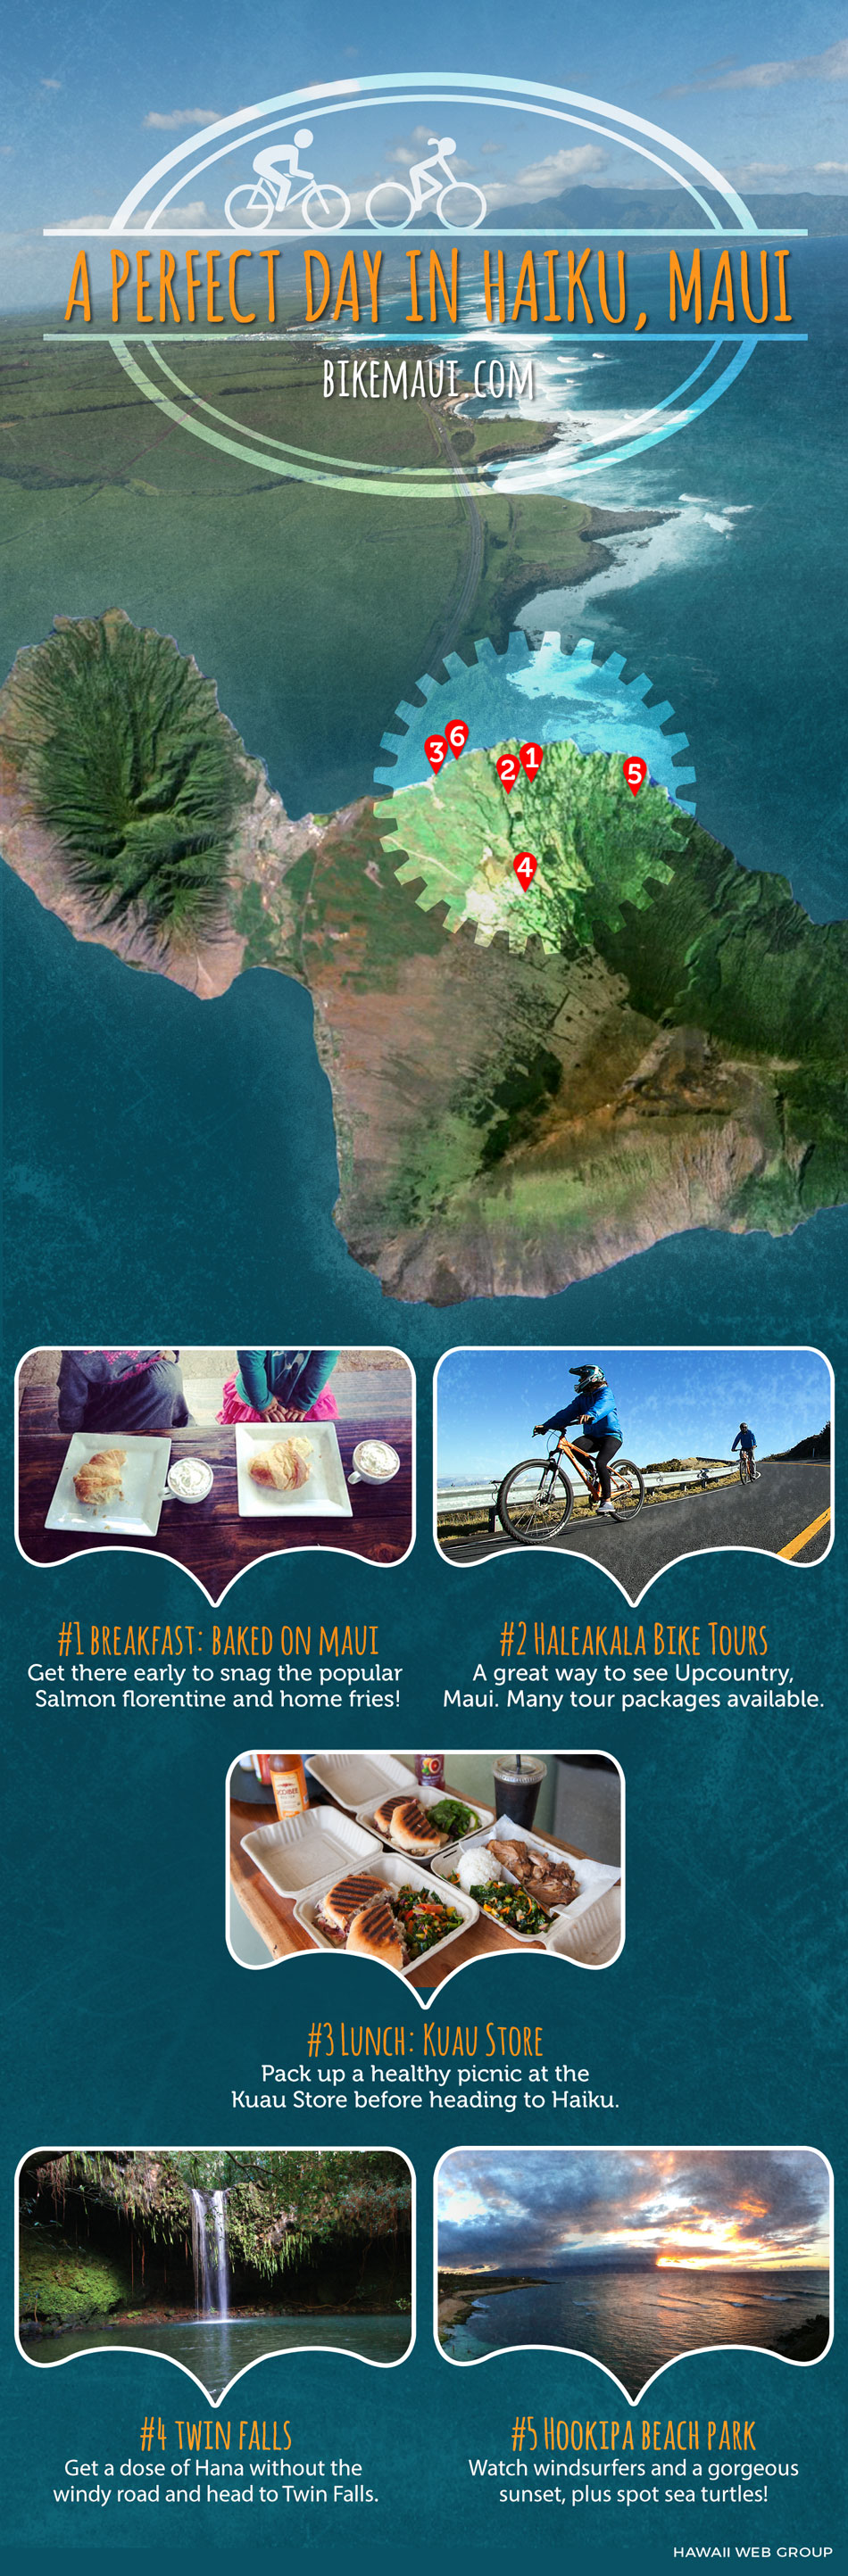 a perfect day in haiku, maui infographic